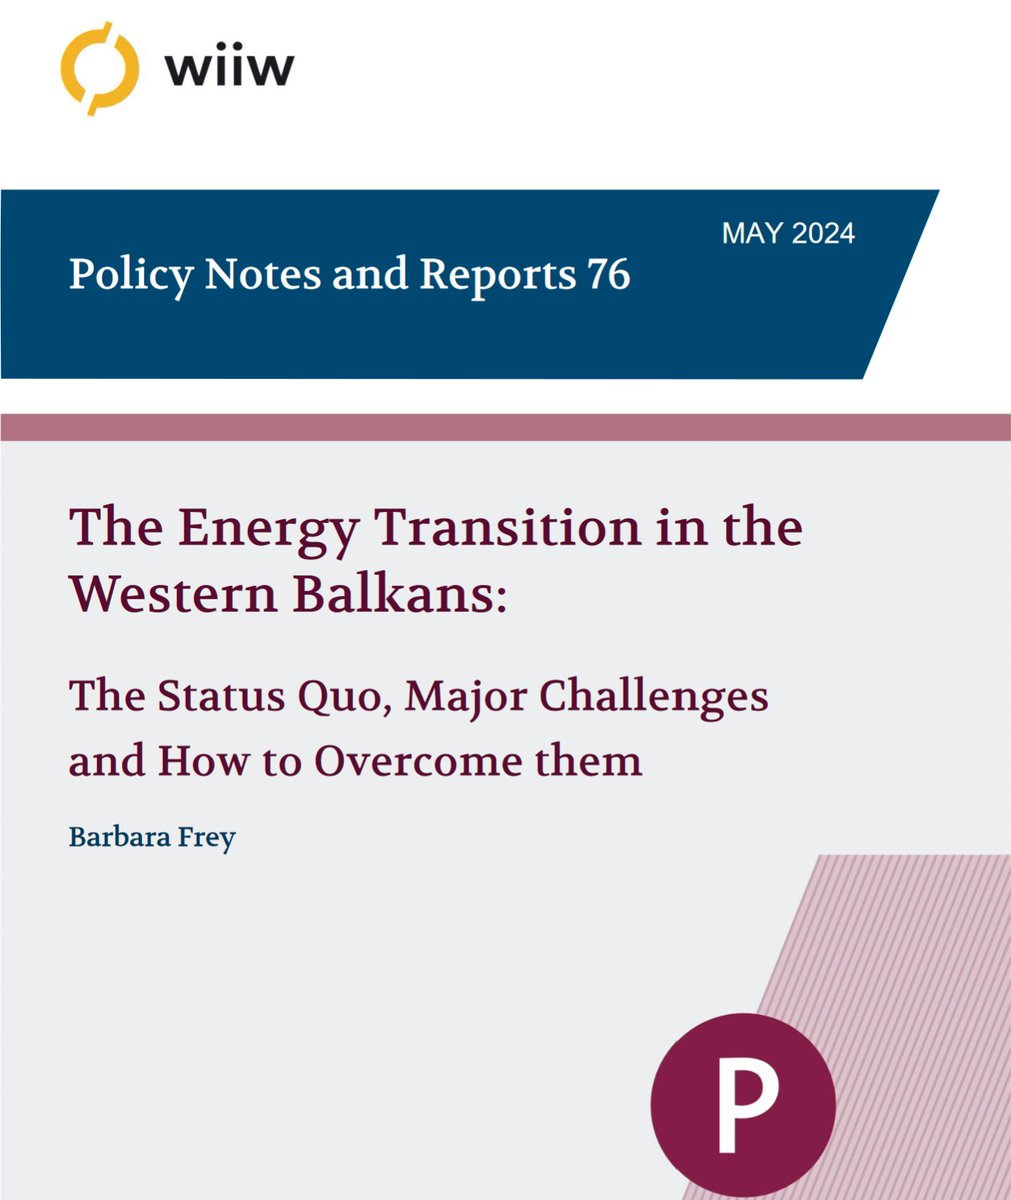 Hot off the press: How can a green-energy system in the Western Balkans be established that supplies electricity at affordable prices? 🇦🇹, with its experience in renewables and strong political relations with the region, could play a crucial role. Downl.➡️shorturl.at/ctFQX